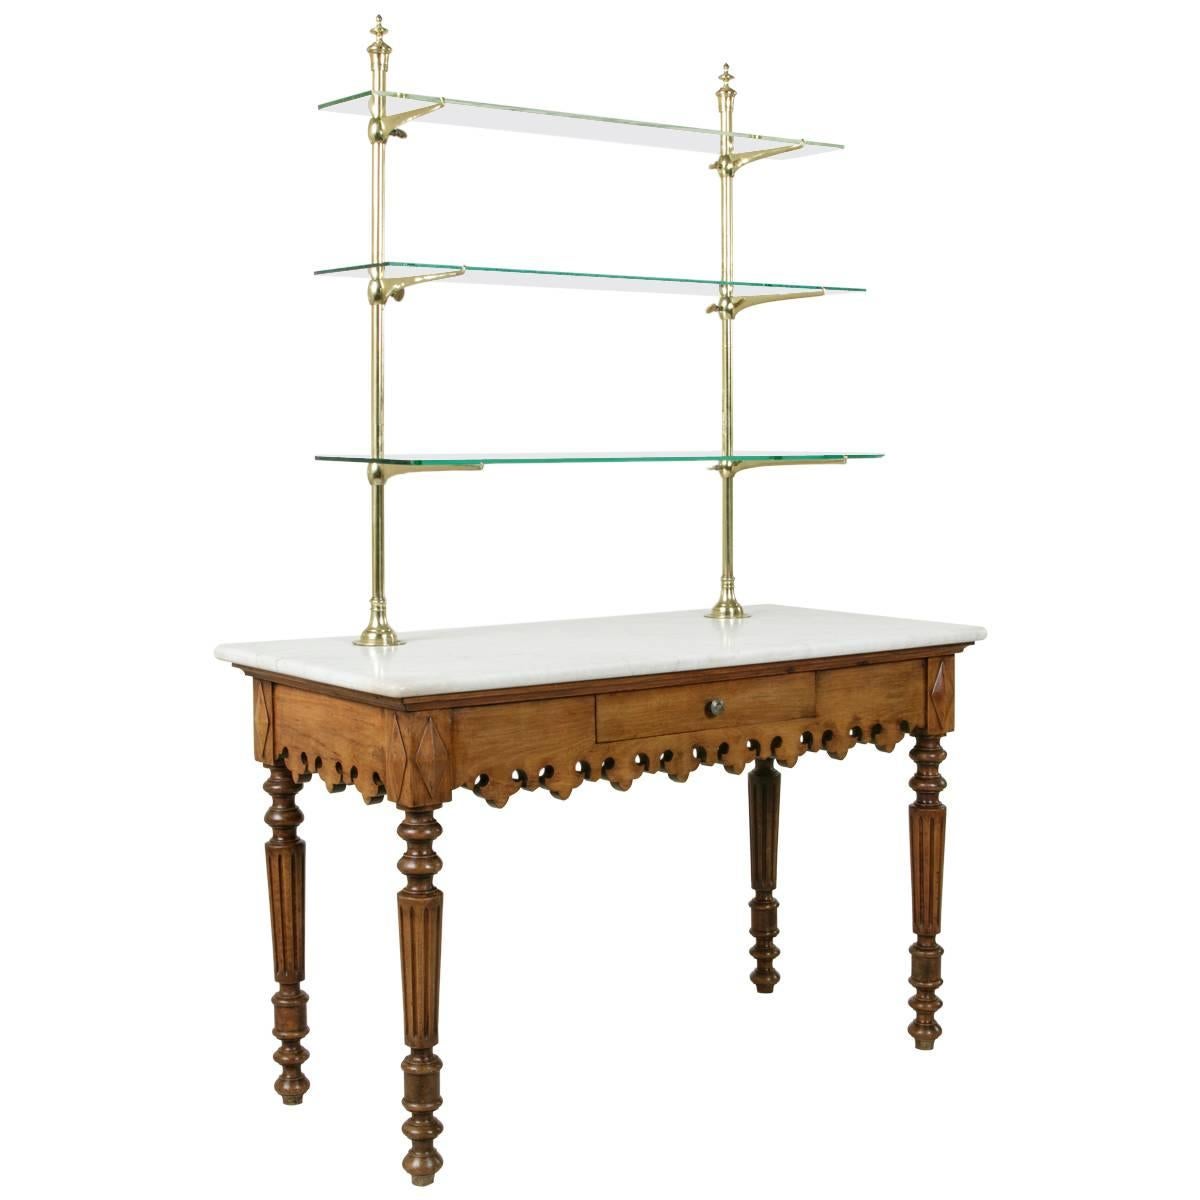 Antique Marble-Top Pastry Table with Bronze Display Shelves from Paris Shop